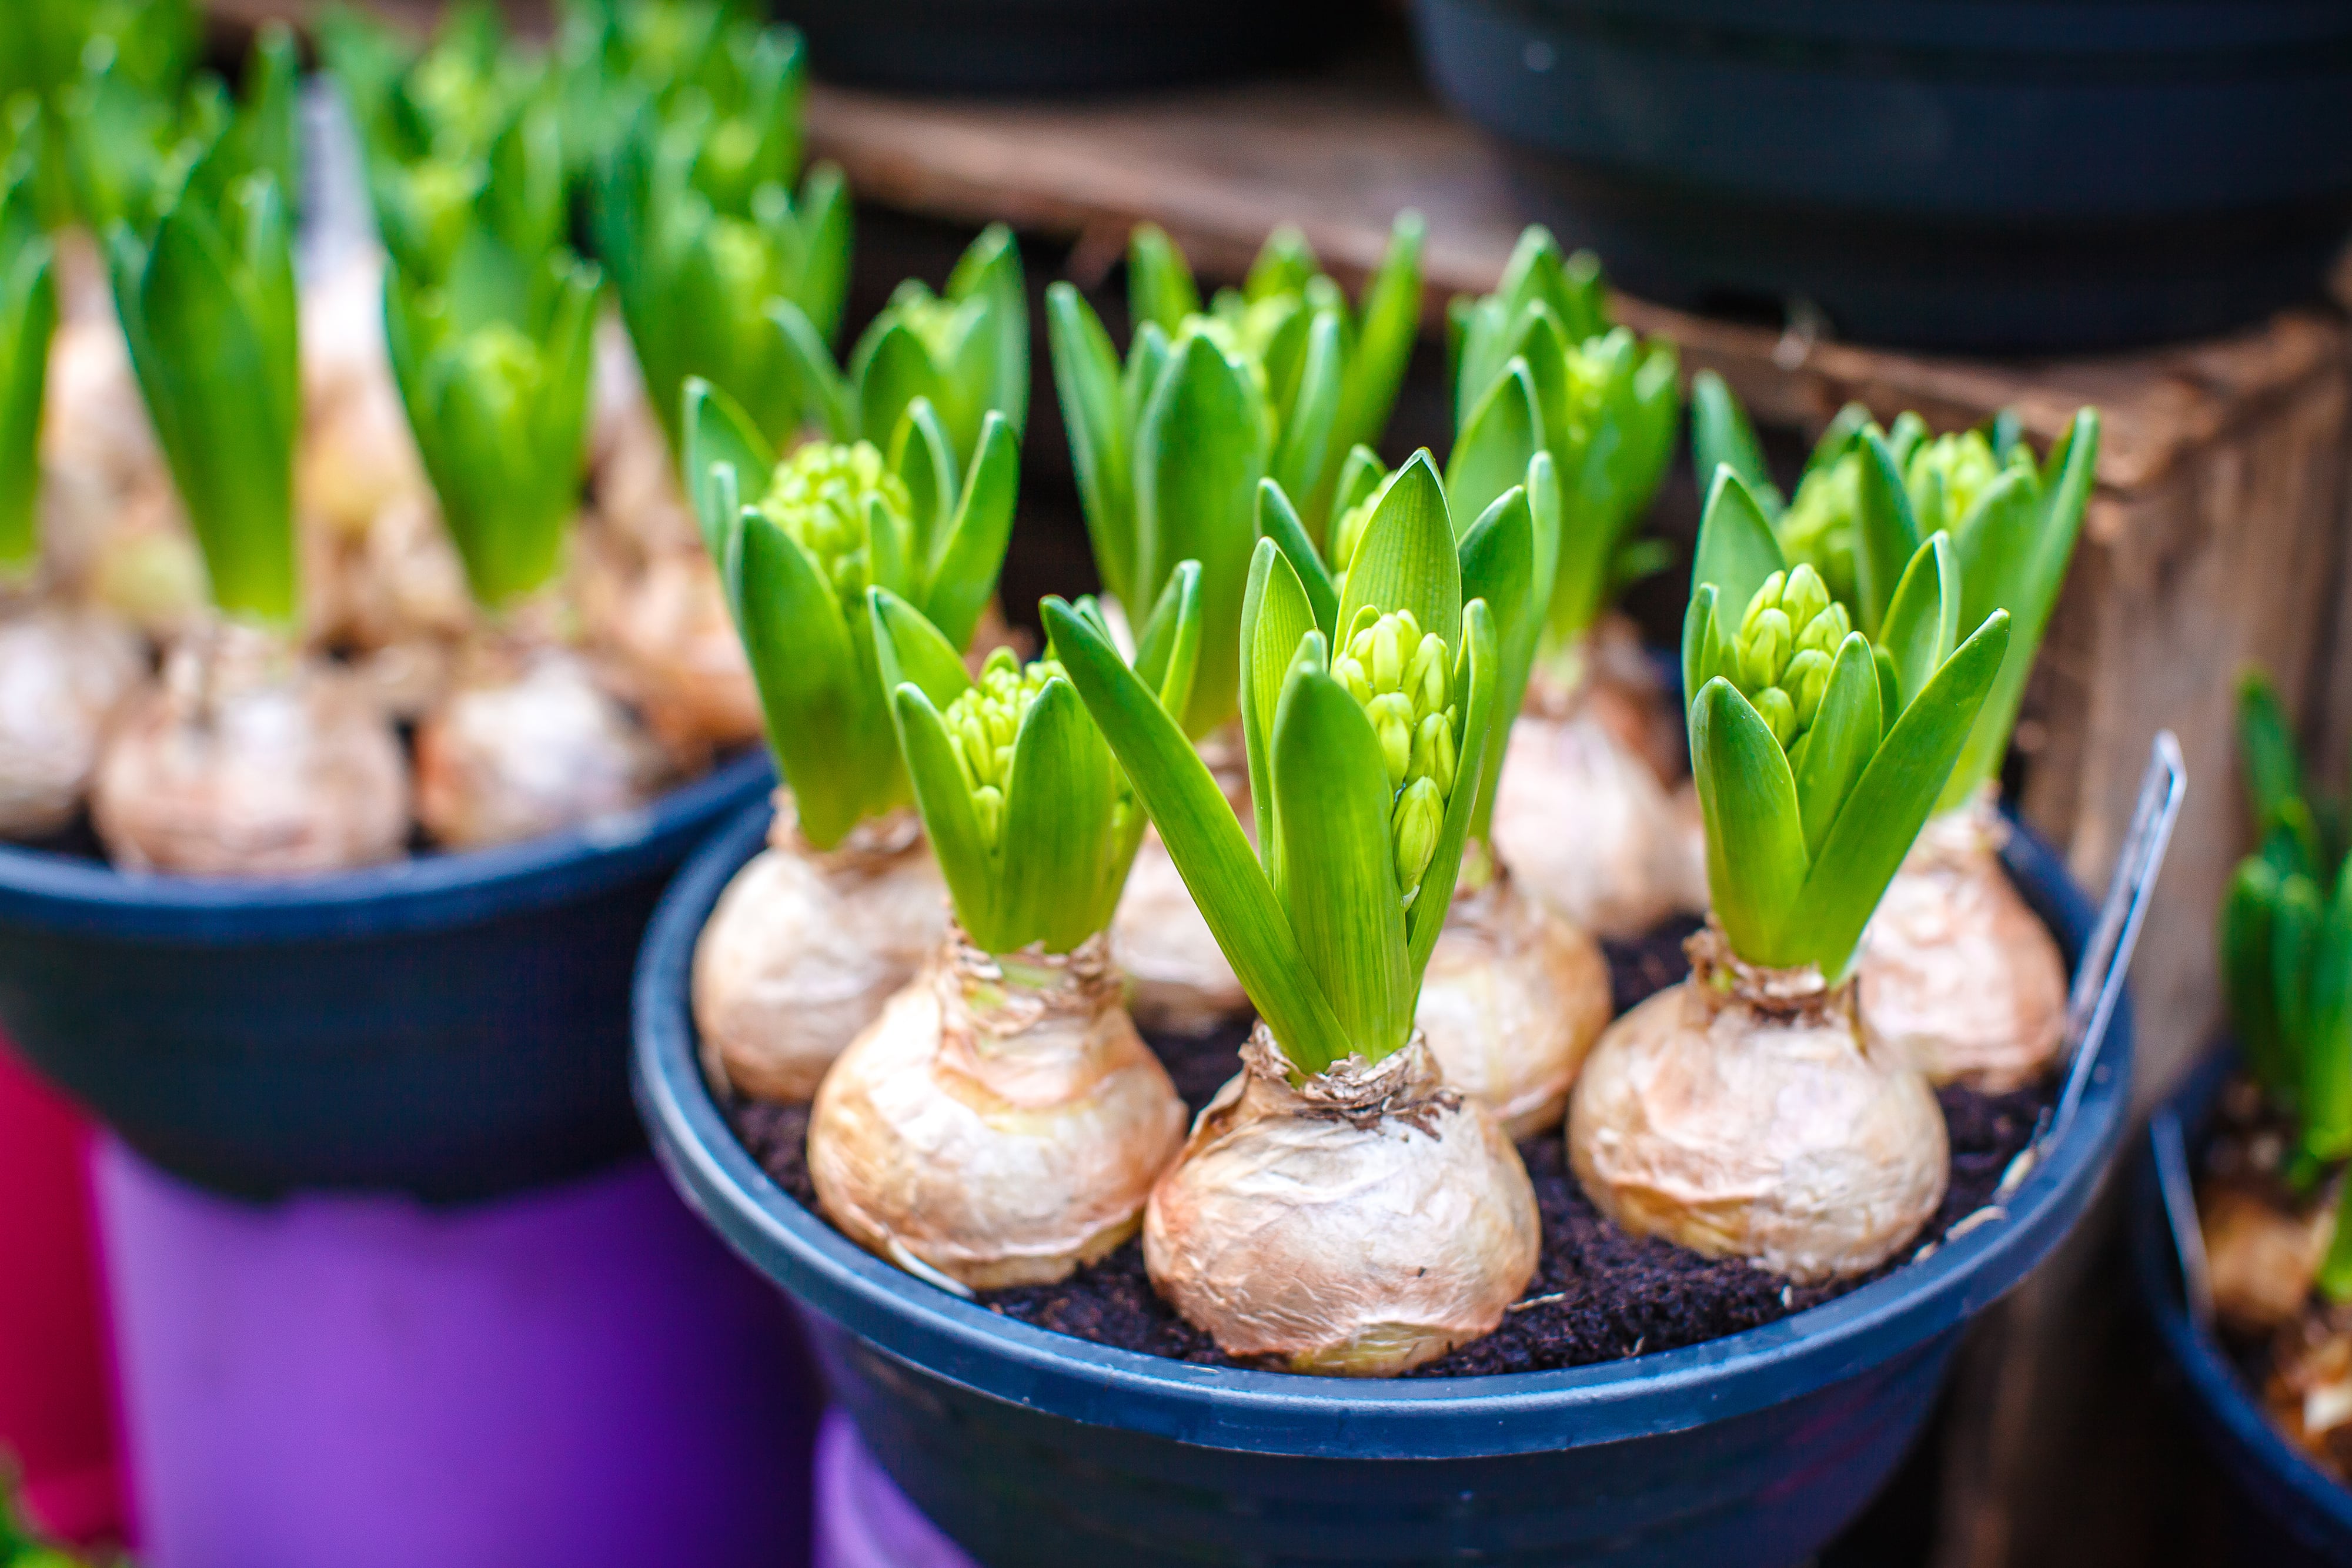 How to Grow Green Onions from Cuttings